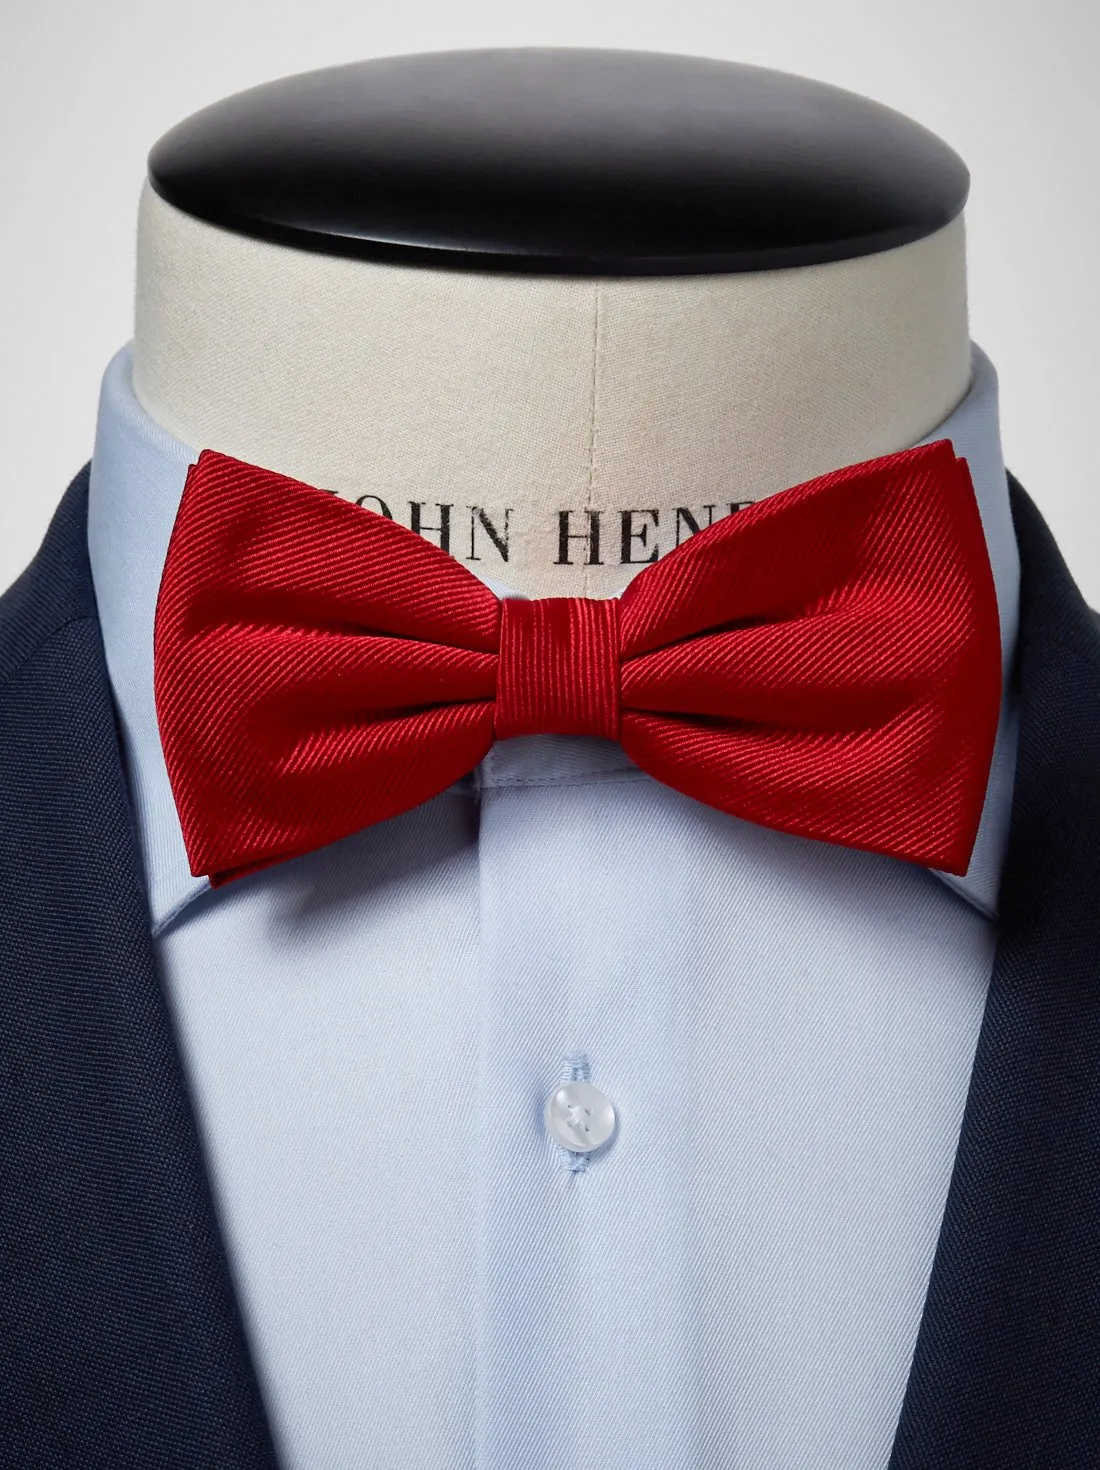 Red Bow Tie Plain